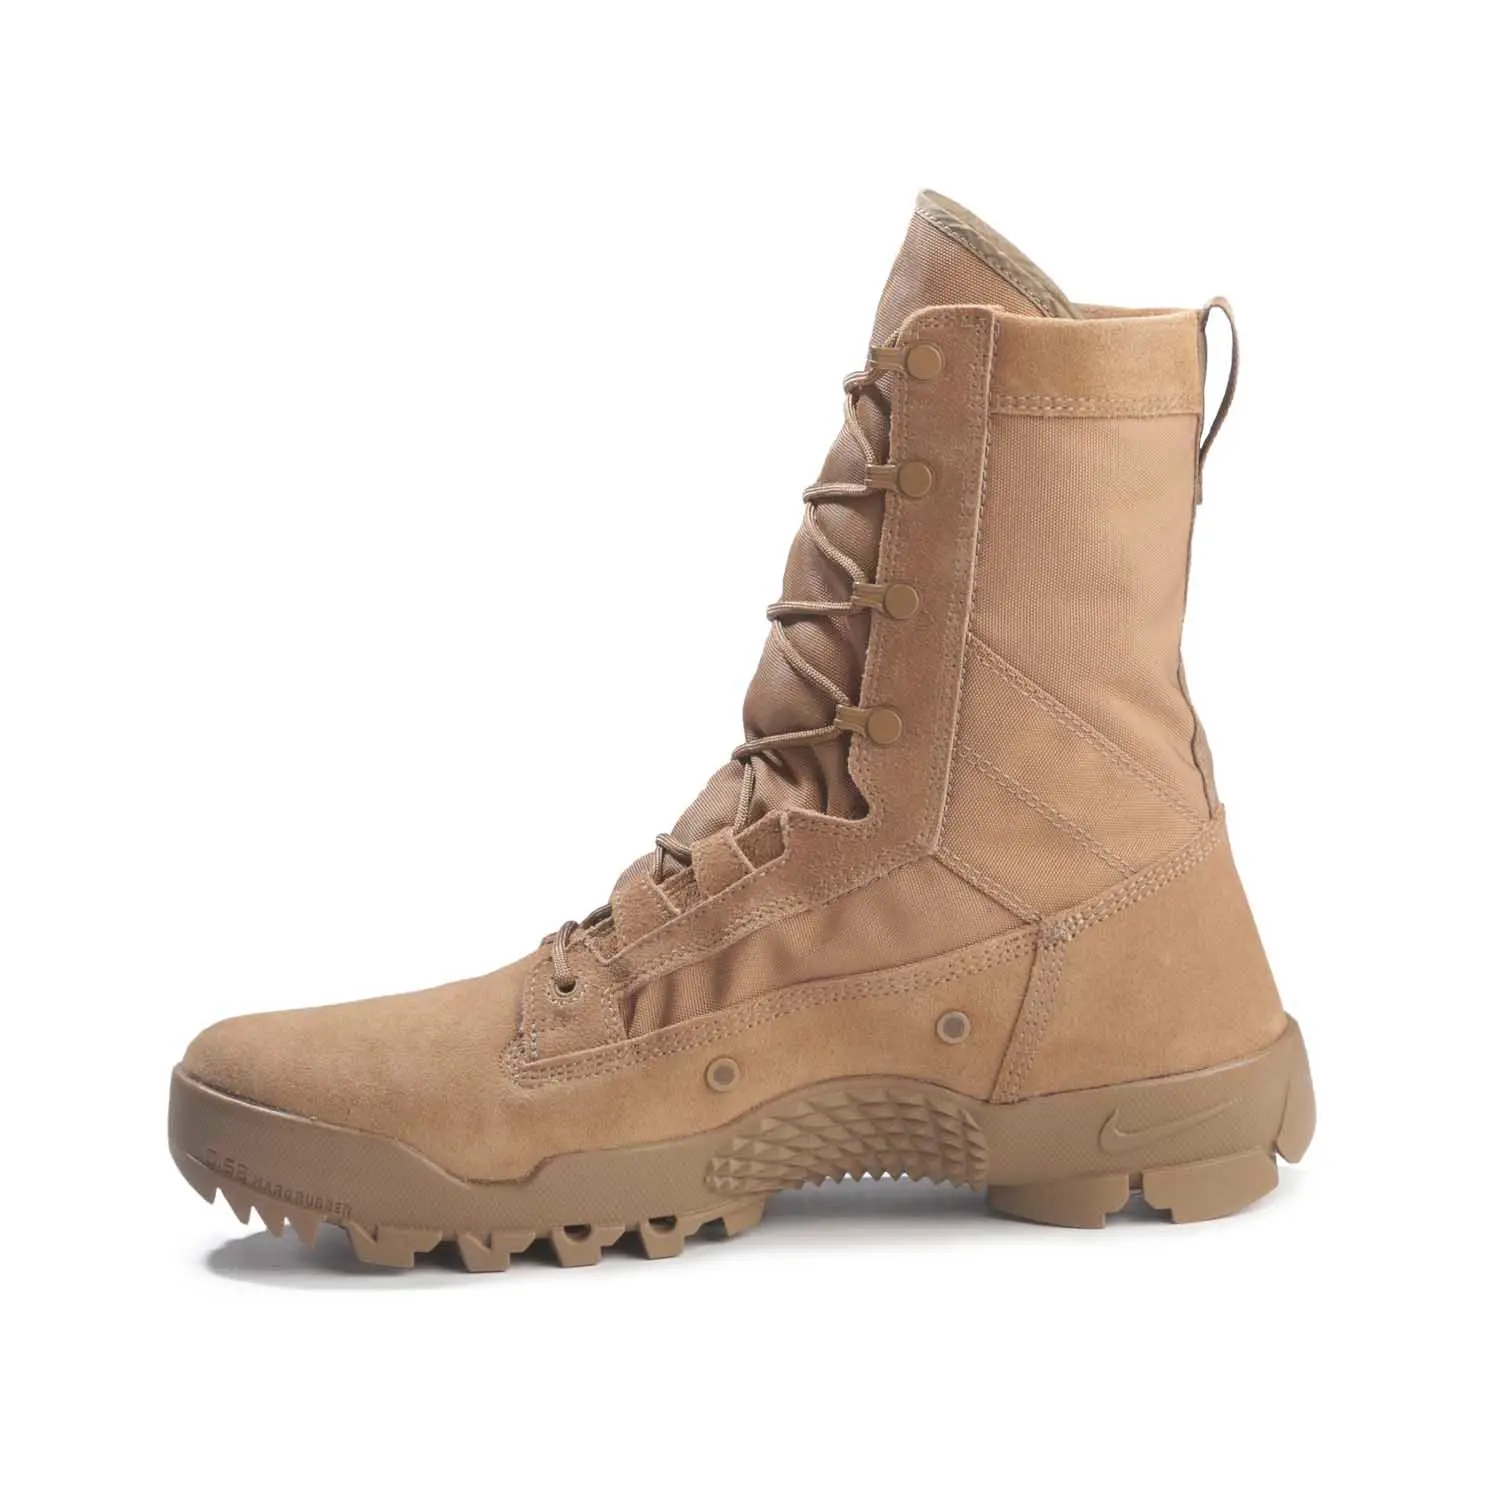 Nike SFB Jungle 8 Inch Leather Boot – Coyote